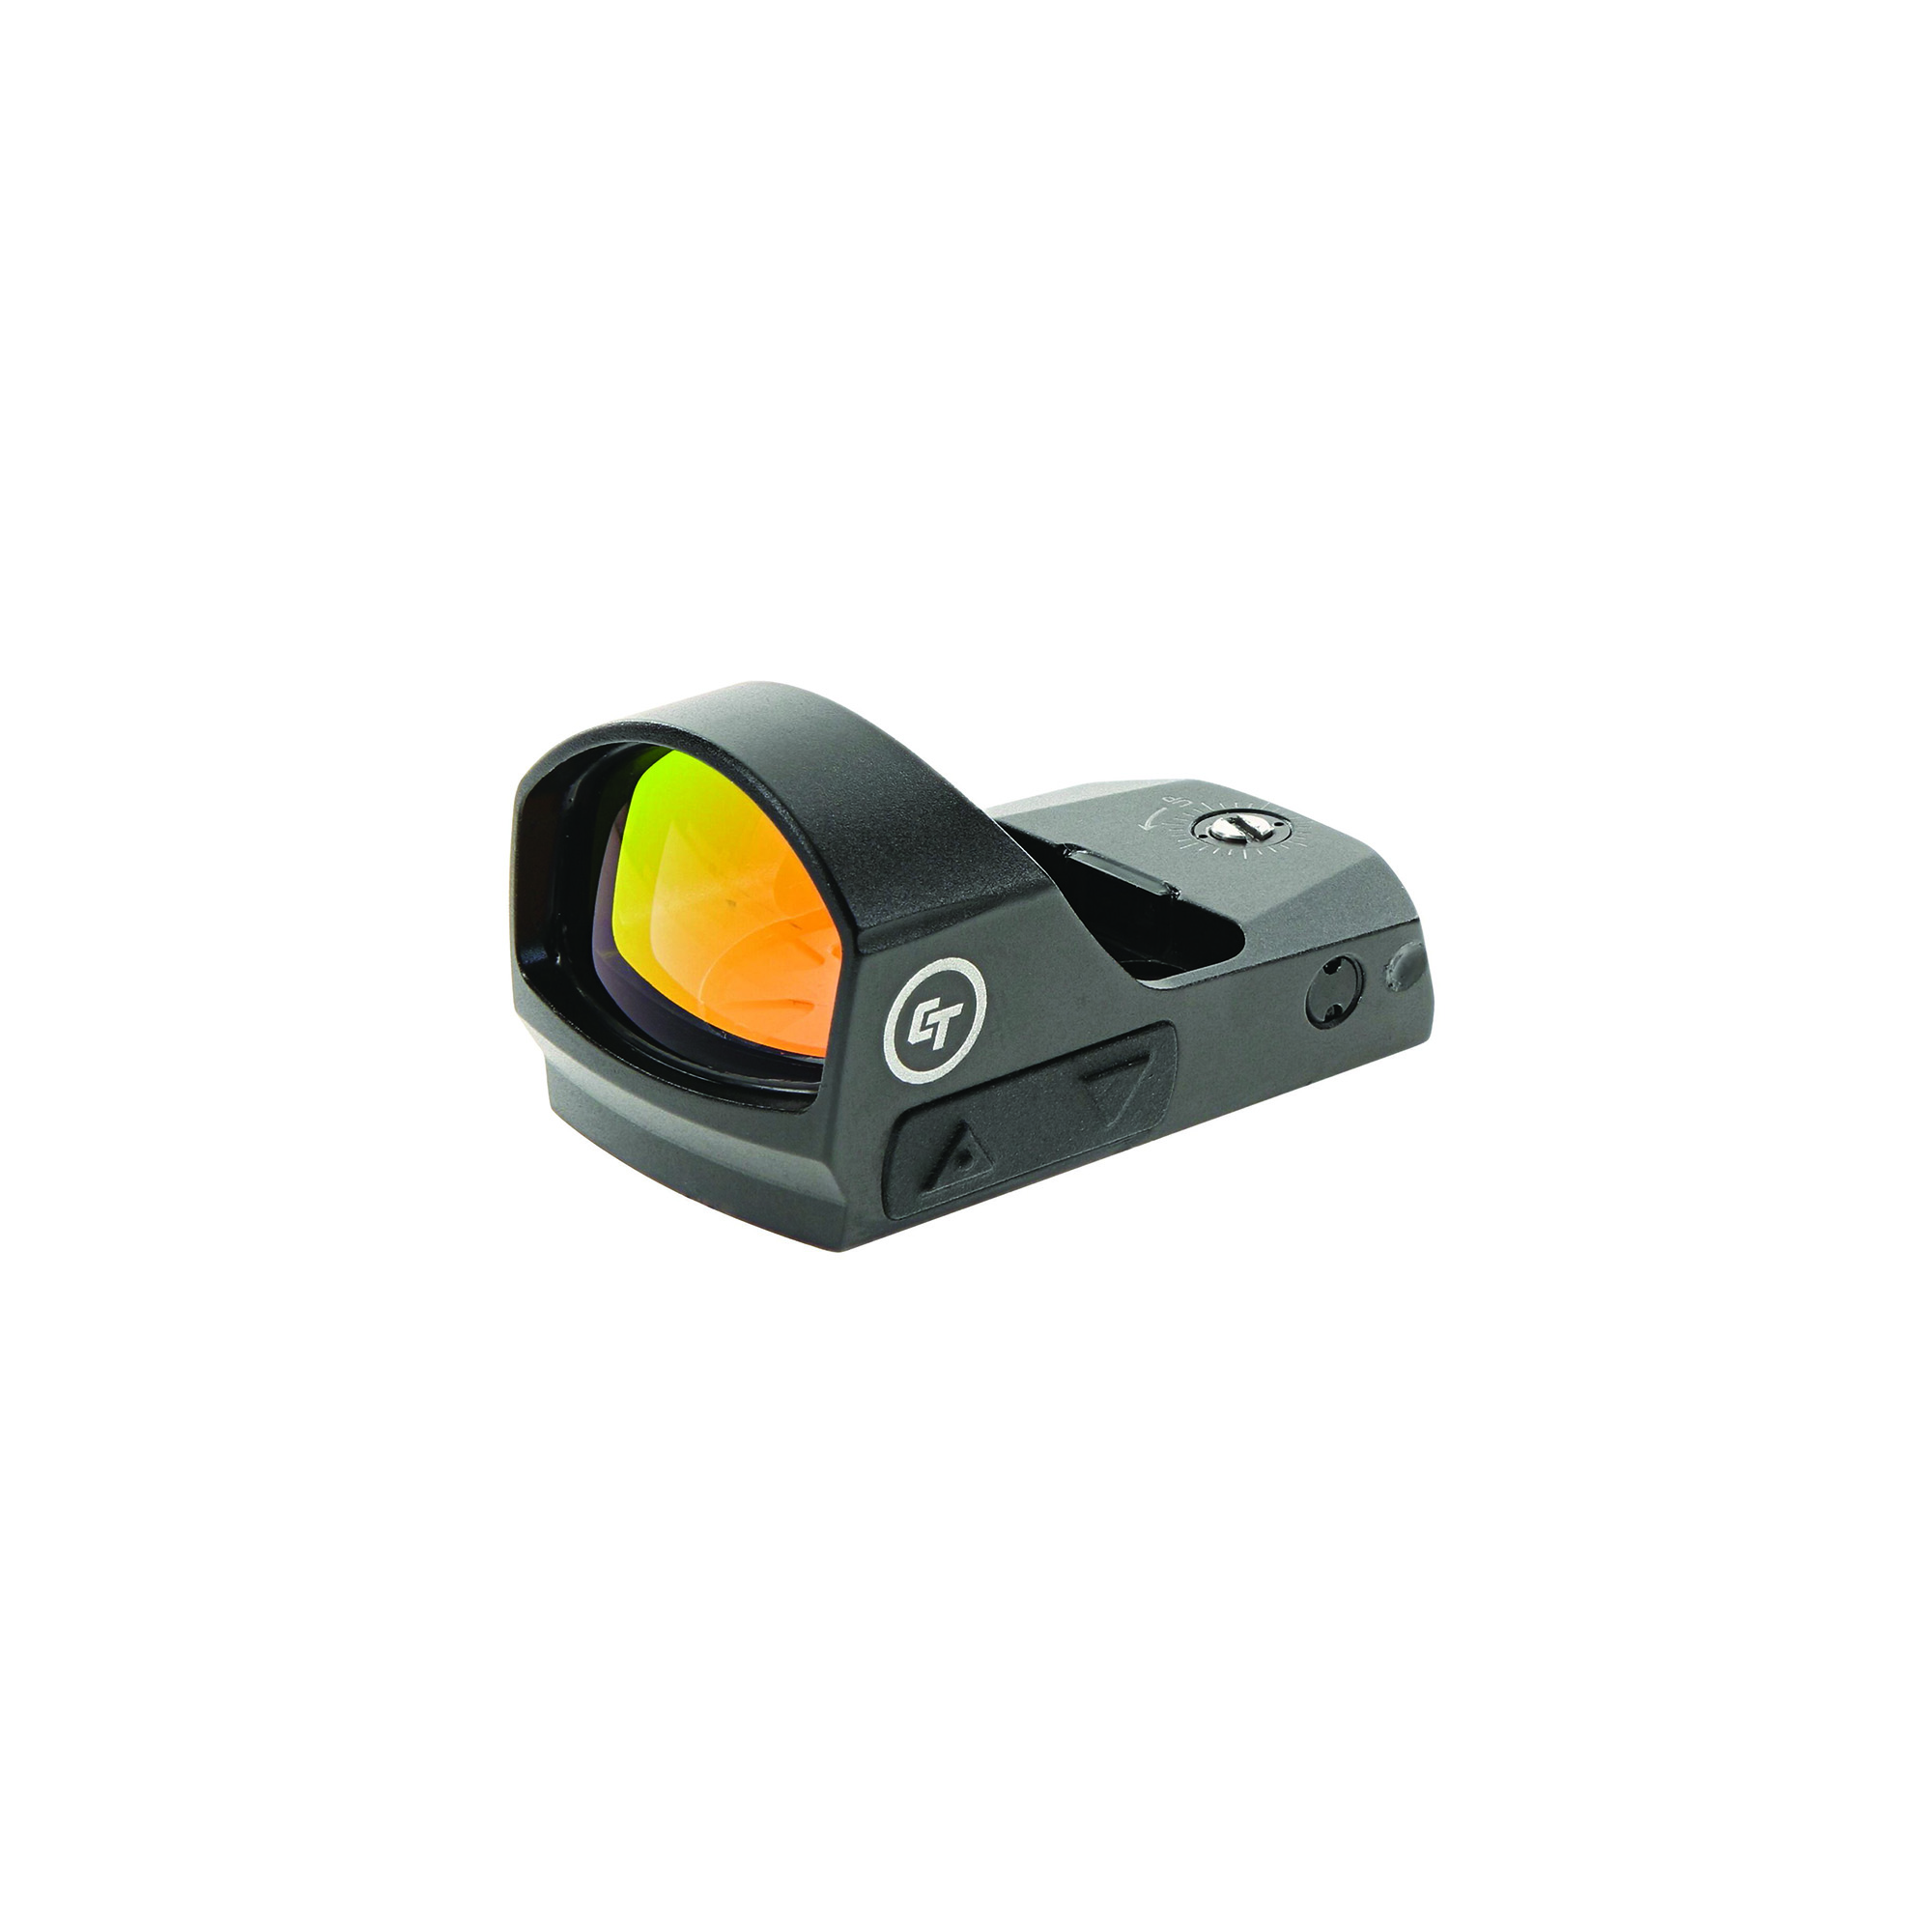 Black Crimson Trace CTS-1250 Compact Open Reflex Pistol Sight with Low Profile LED 3.25 MOA Red Dot and Adjustable Brightness for Handguns